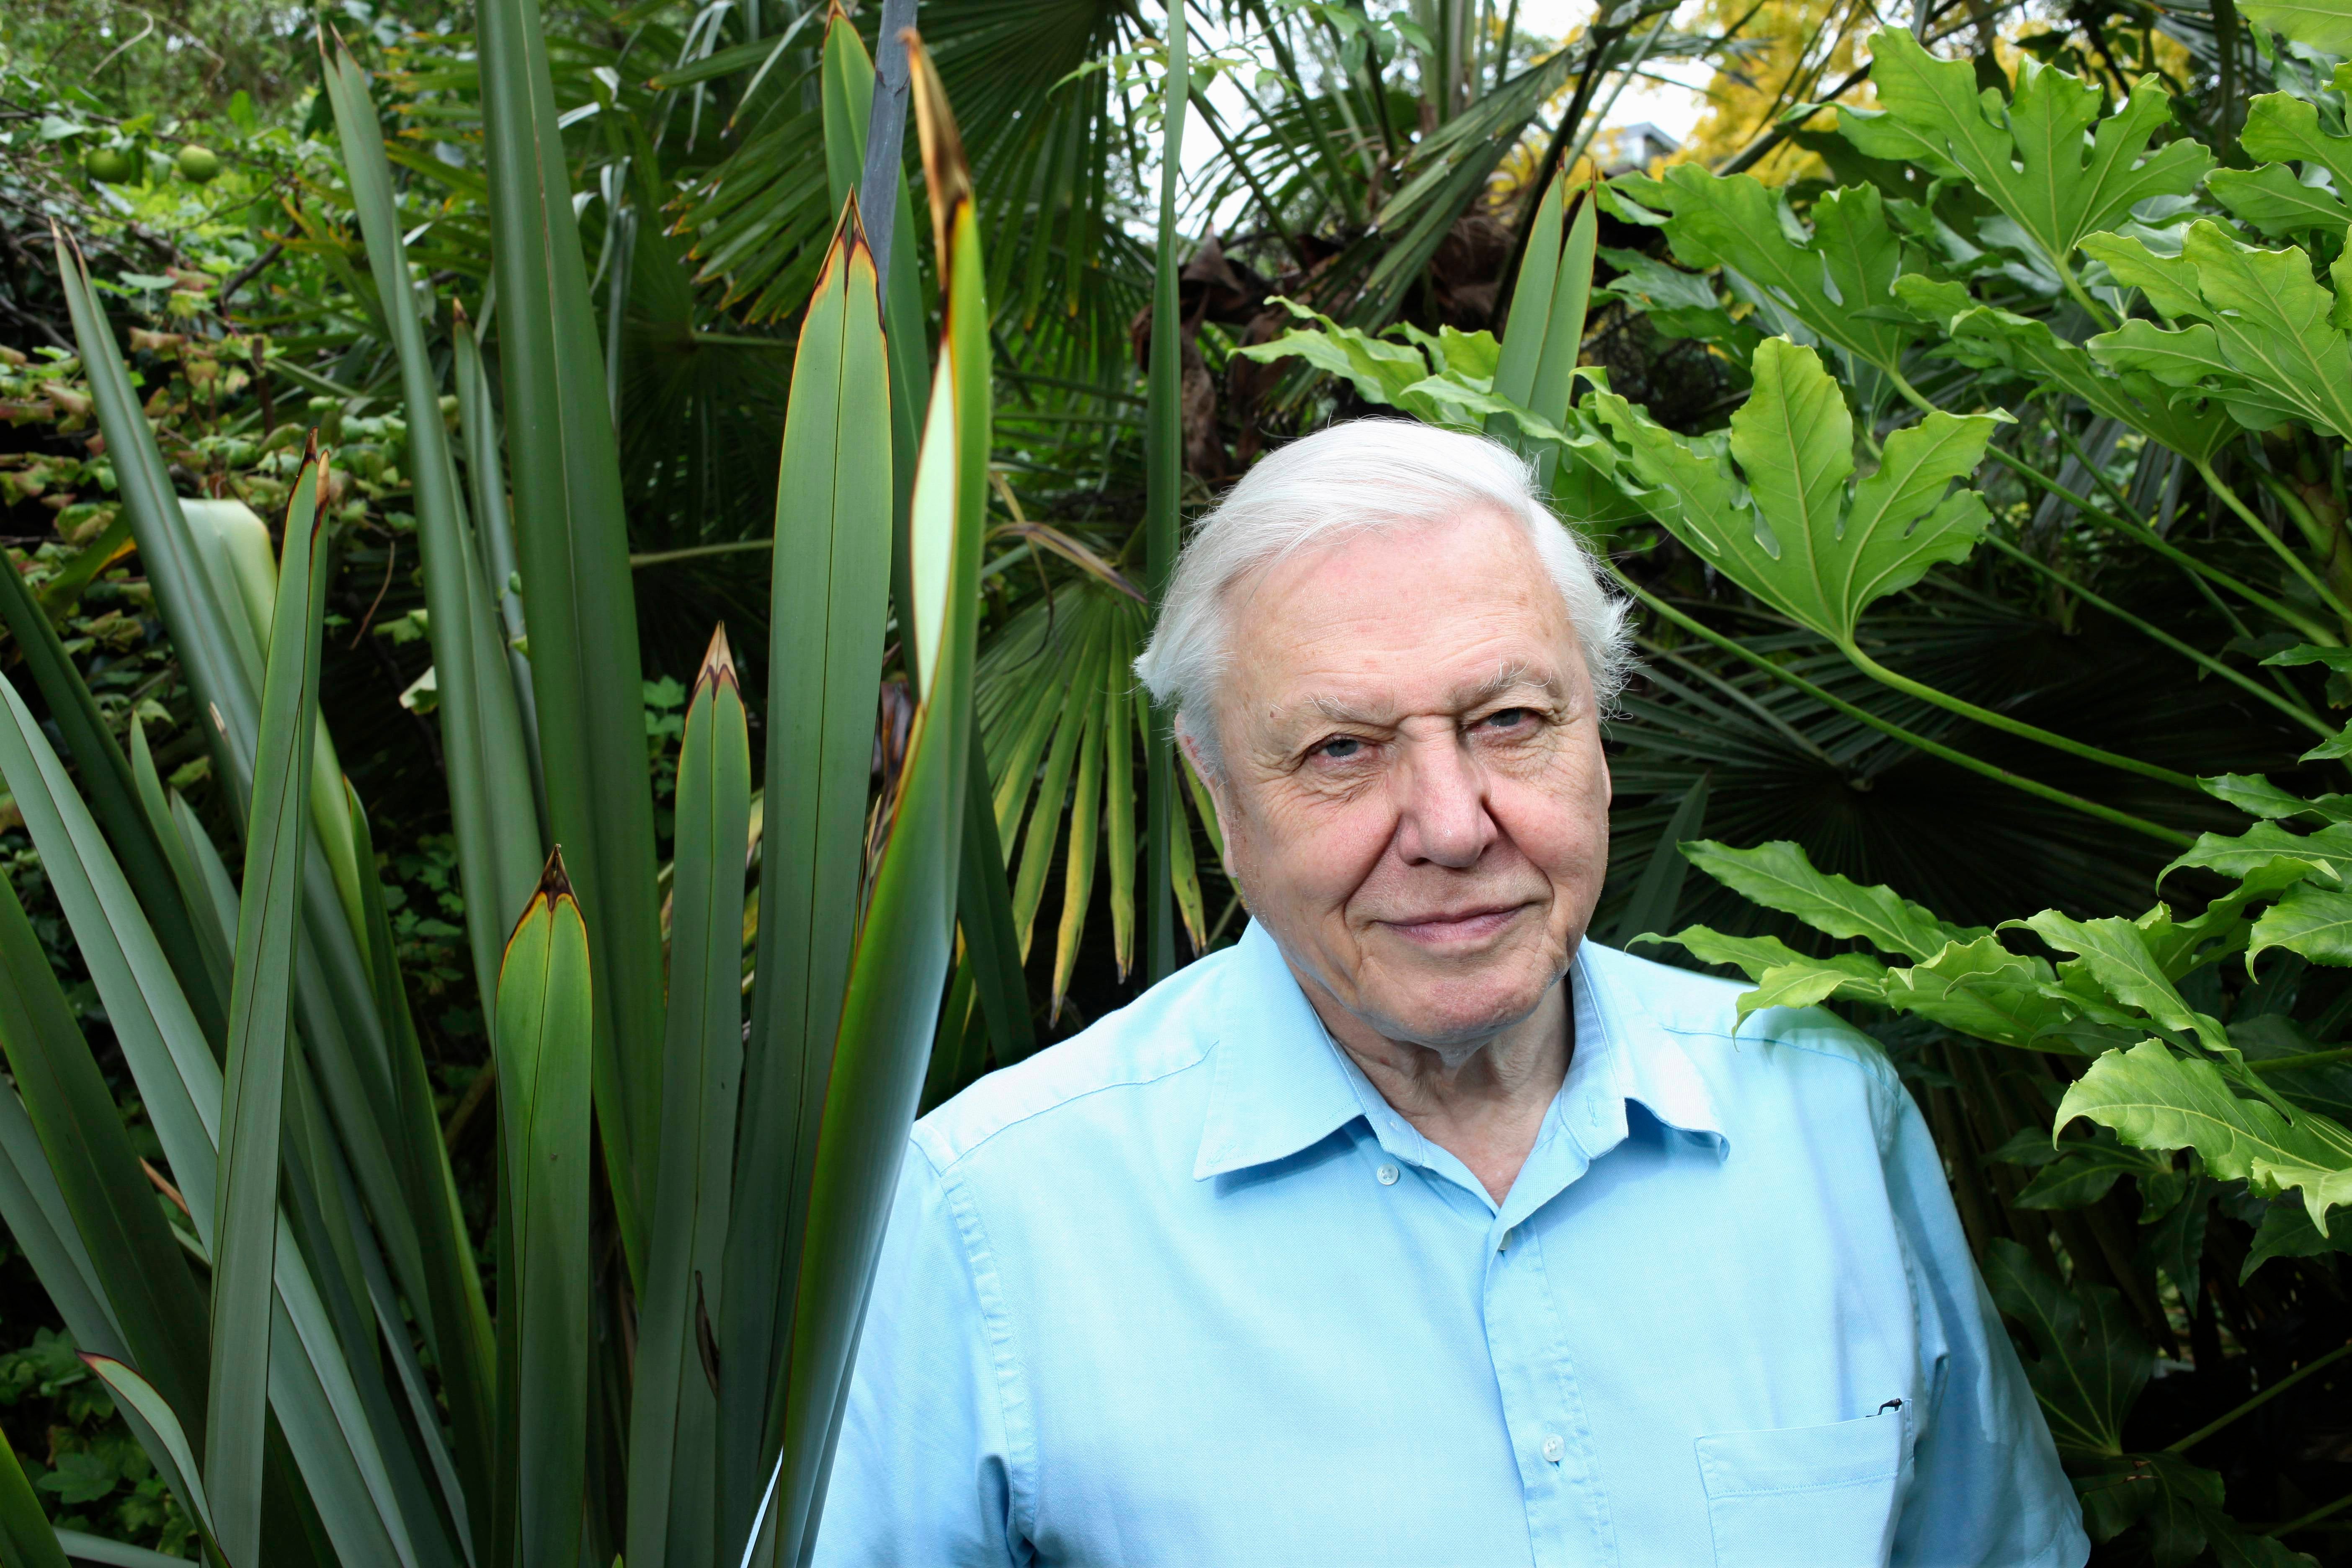 English naturalist and broadcaster Sir David Attenborough was left injured after being stabbed by a cactus with needles like glass